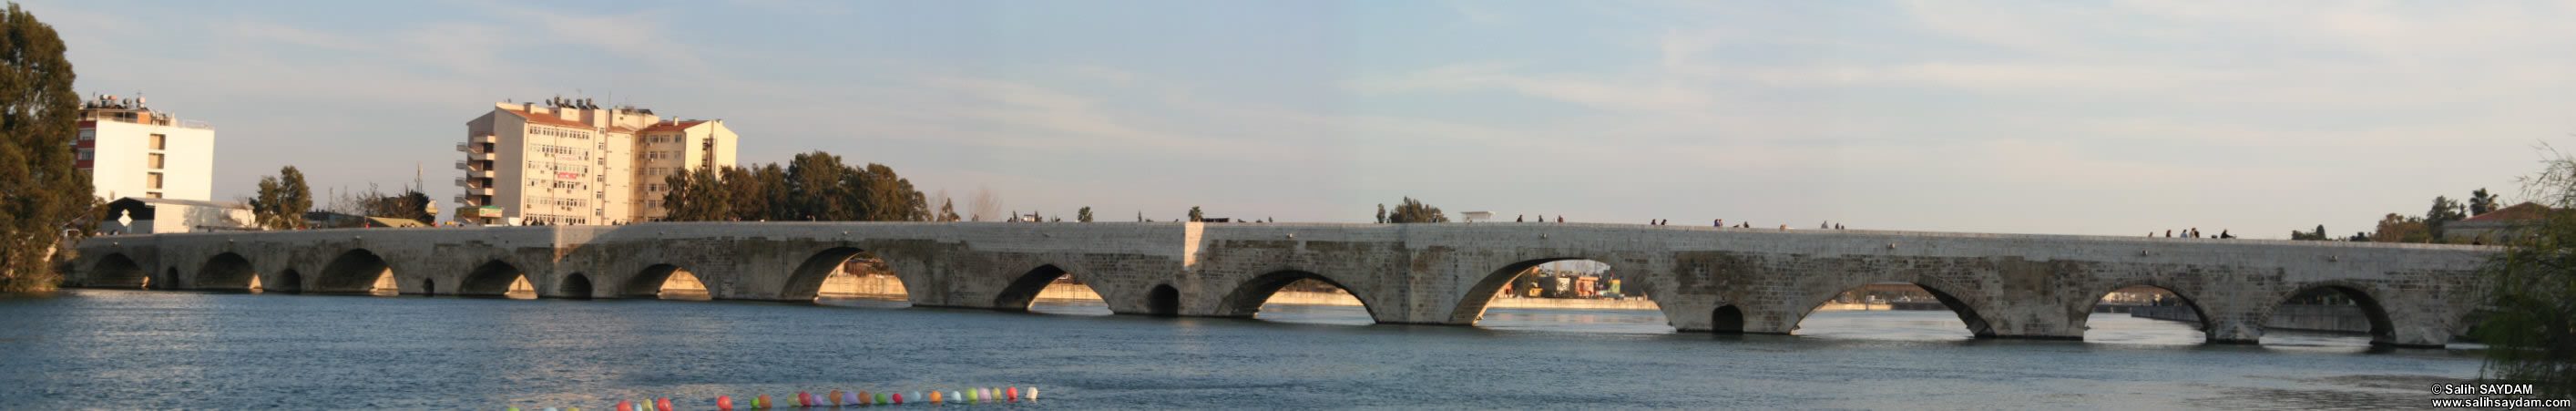 Panorama #02 of Taskopru (Stone Bridge), which was build over the River Seyhan by the Roman Emperor Hadrianus in the 4th century.